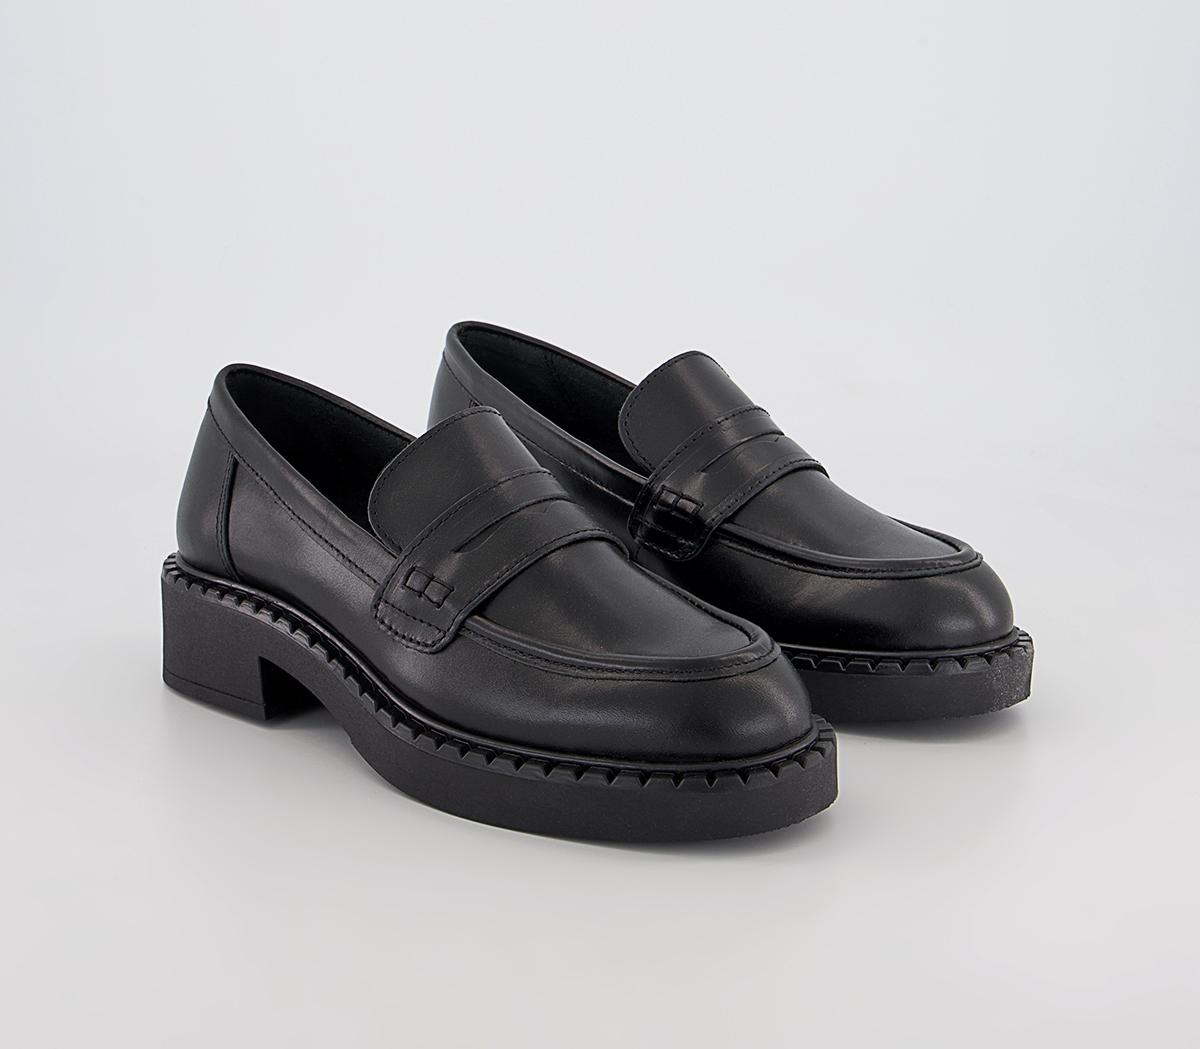 OFFICE Favour Chunky Sole Loafers Black Leather - Flat Shoes for Women